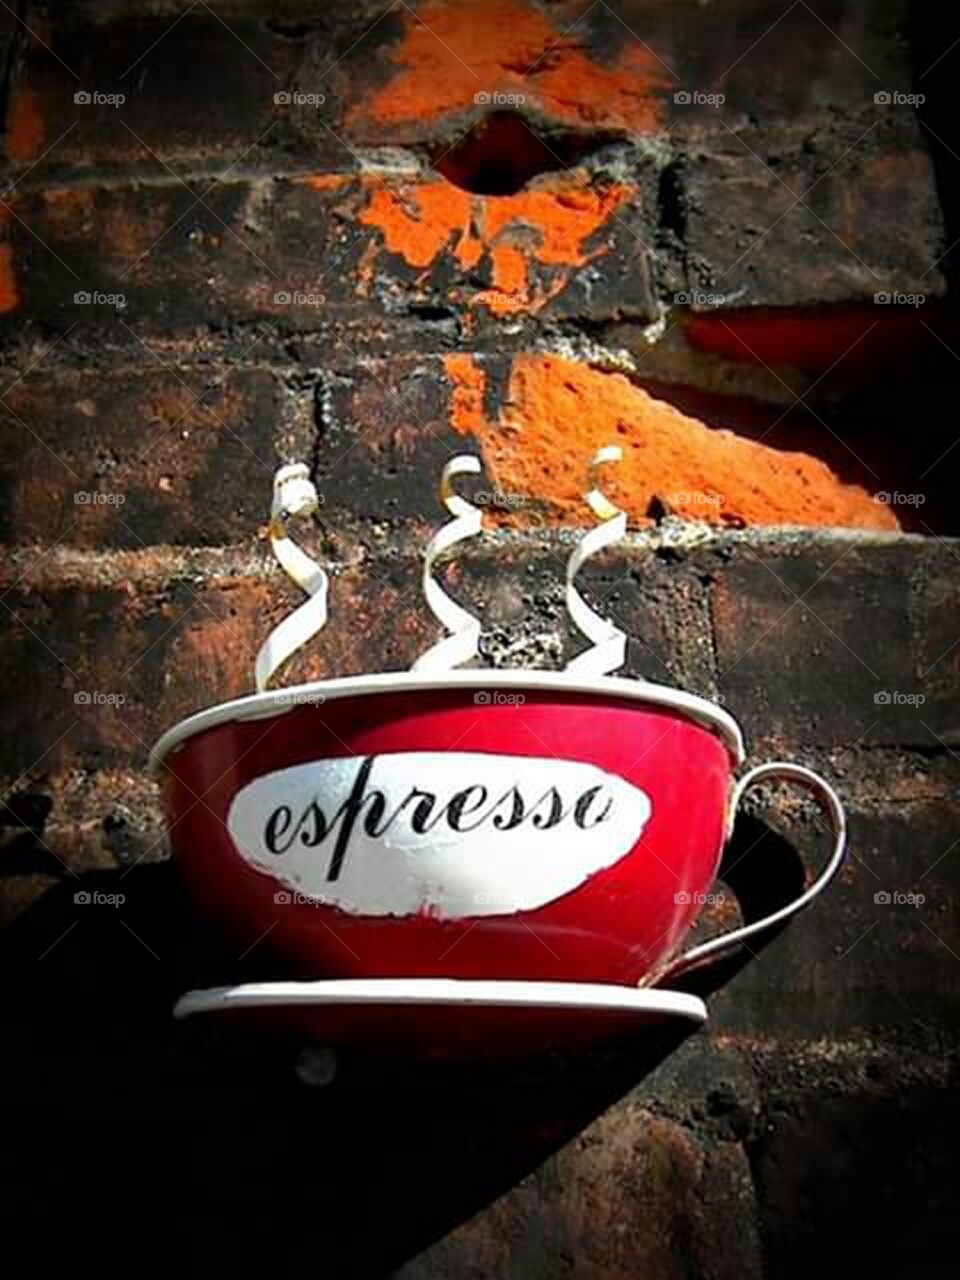 image of espresso cup decoration outside of coffee shop